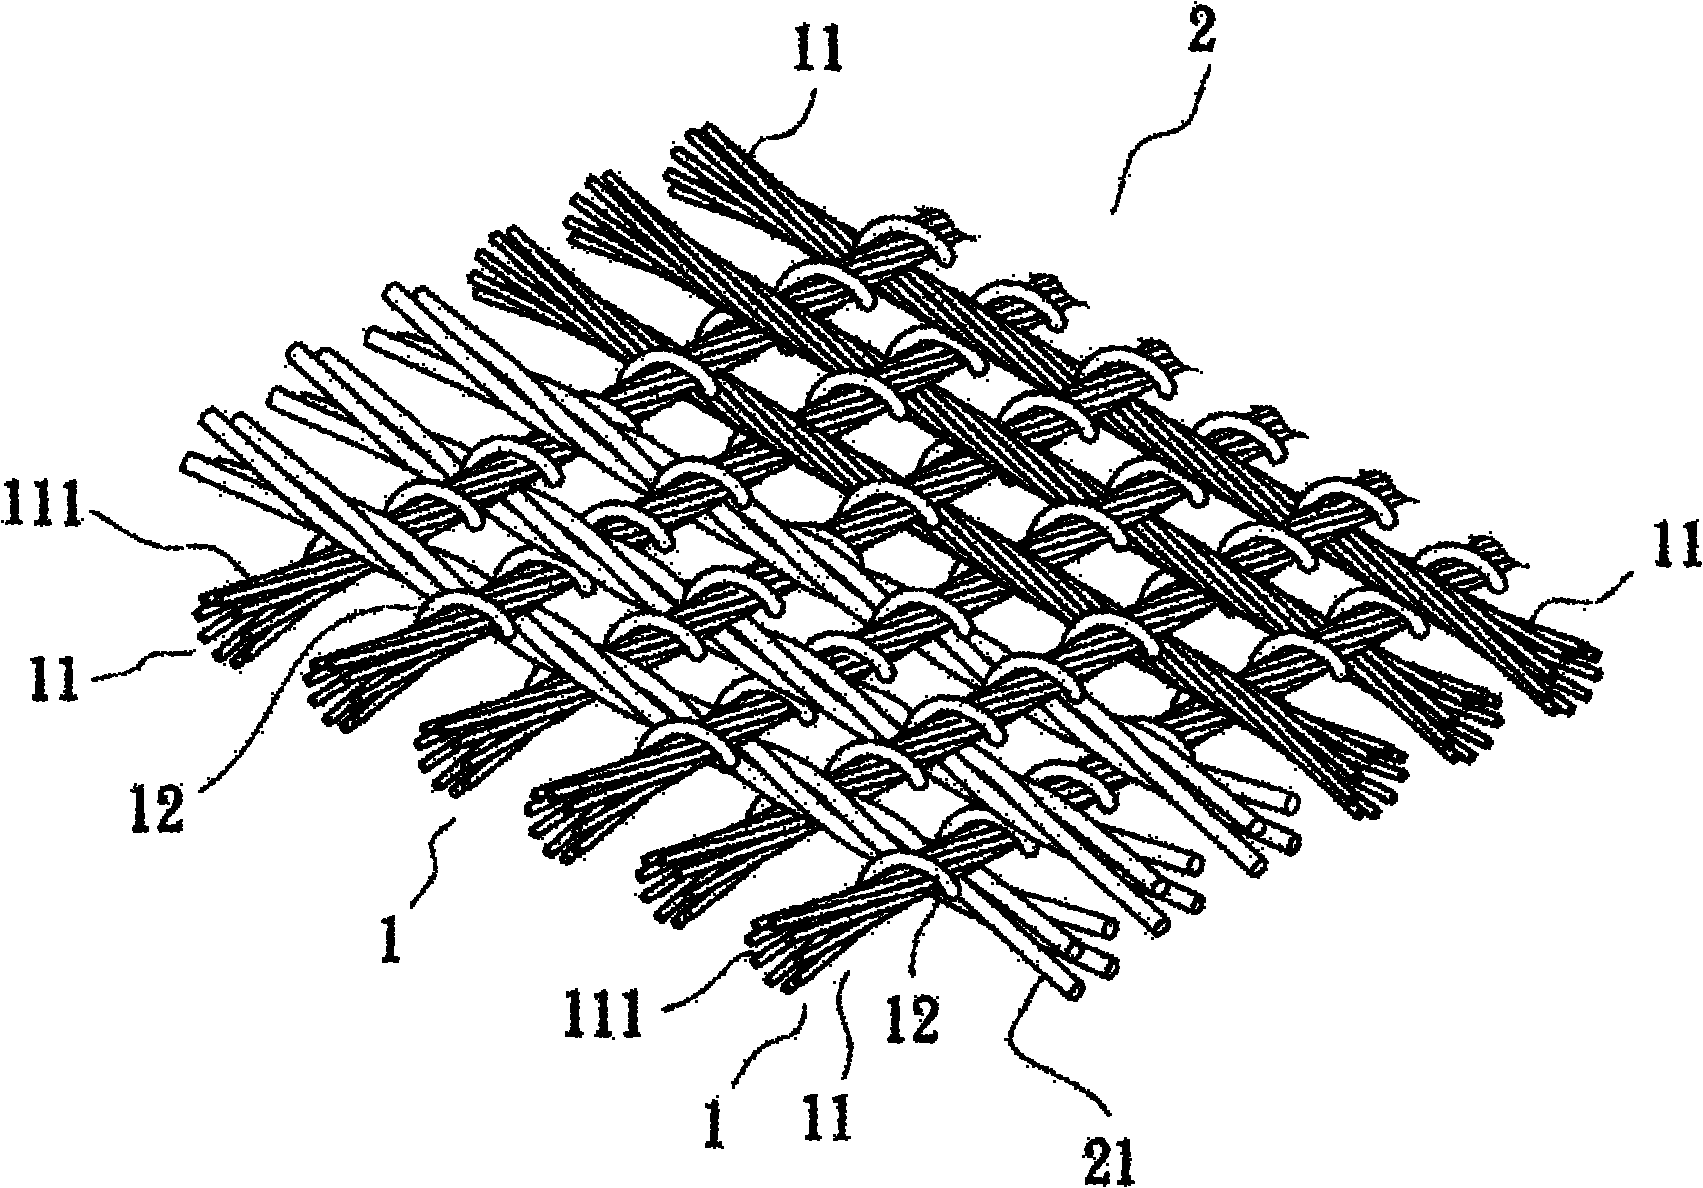 Conductive yarn and cloth structure applying same